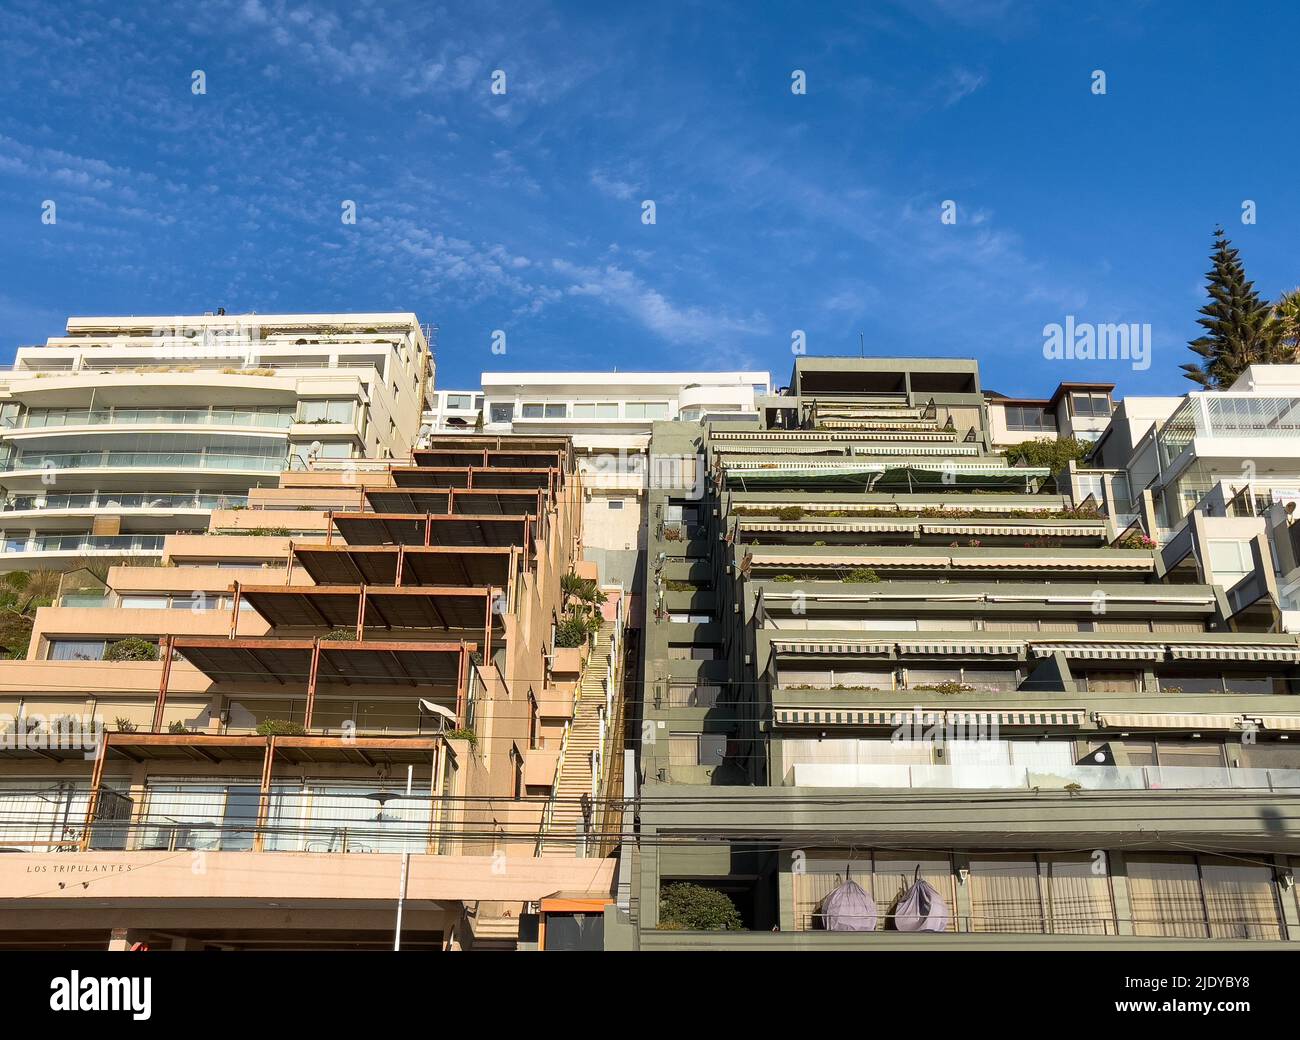 Summer vacation complex of stepped apartment buildings on hill side in Reñaca coast, Chile. Sunny day on tourism destination in Valparaiso region Stock Photo